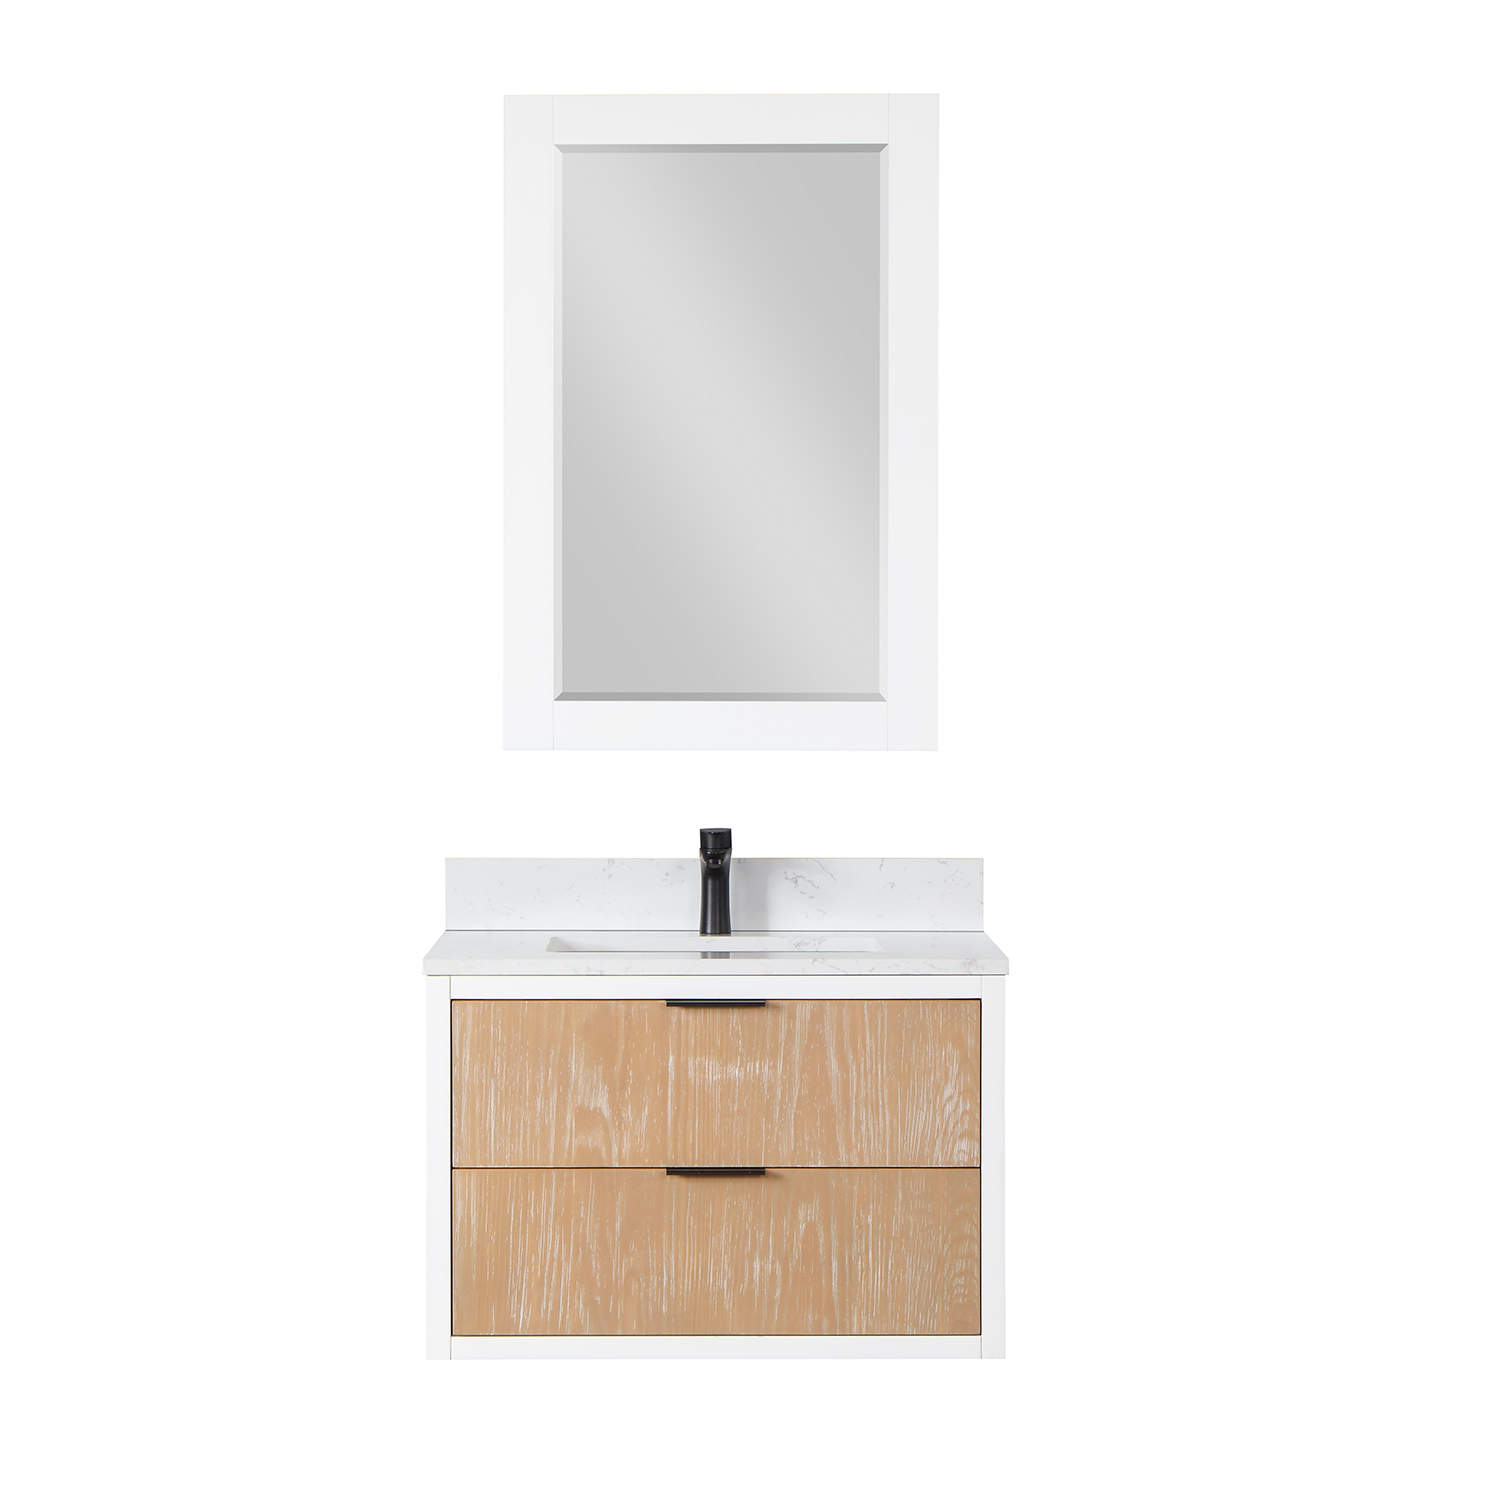 Issac Edwards Collection 30" Single Bathroom Vanity in Weathered Pine with Carrara White Composite Stone Countertop without Mirror 